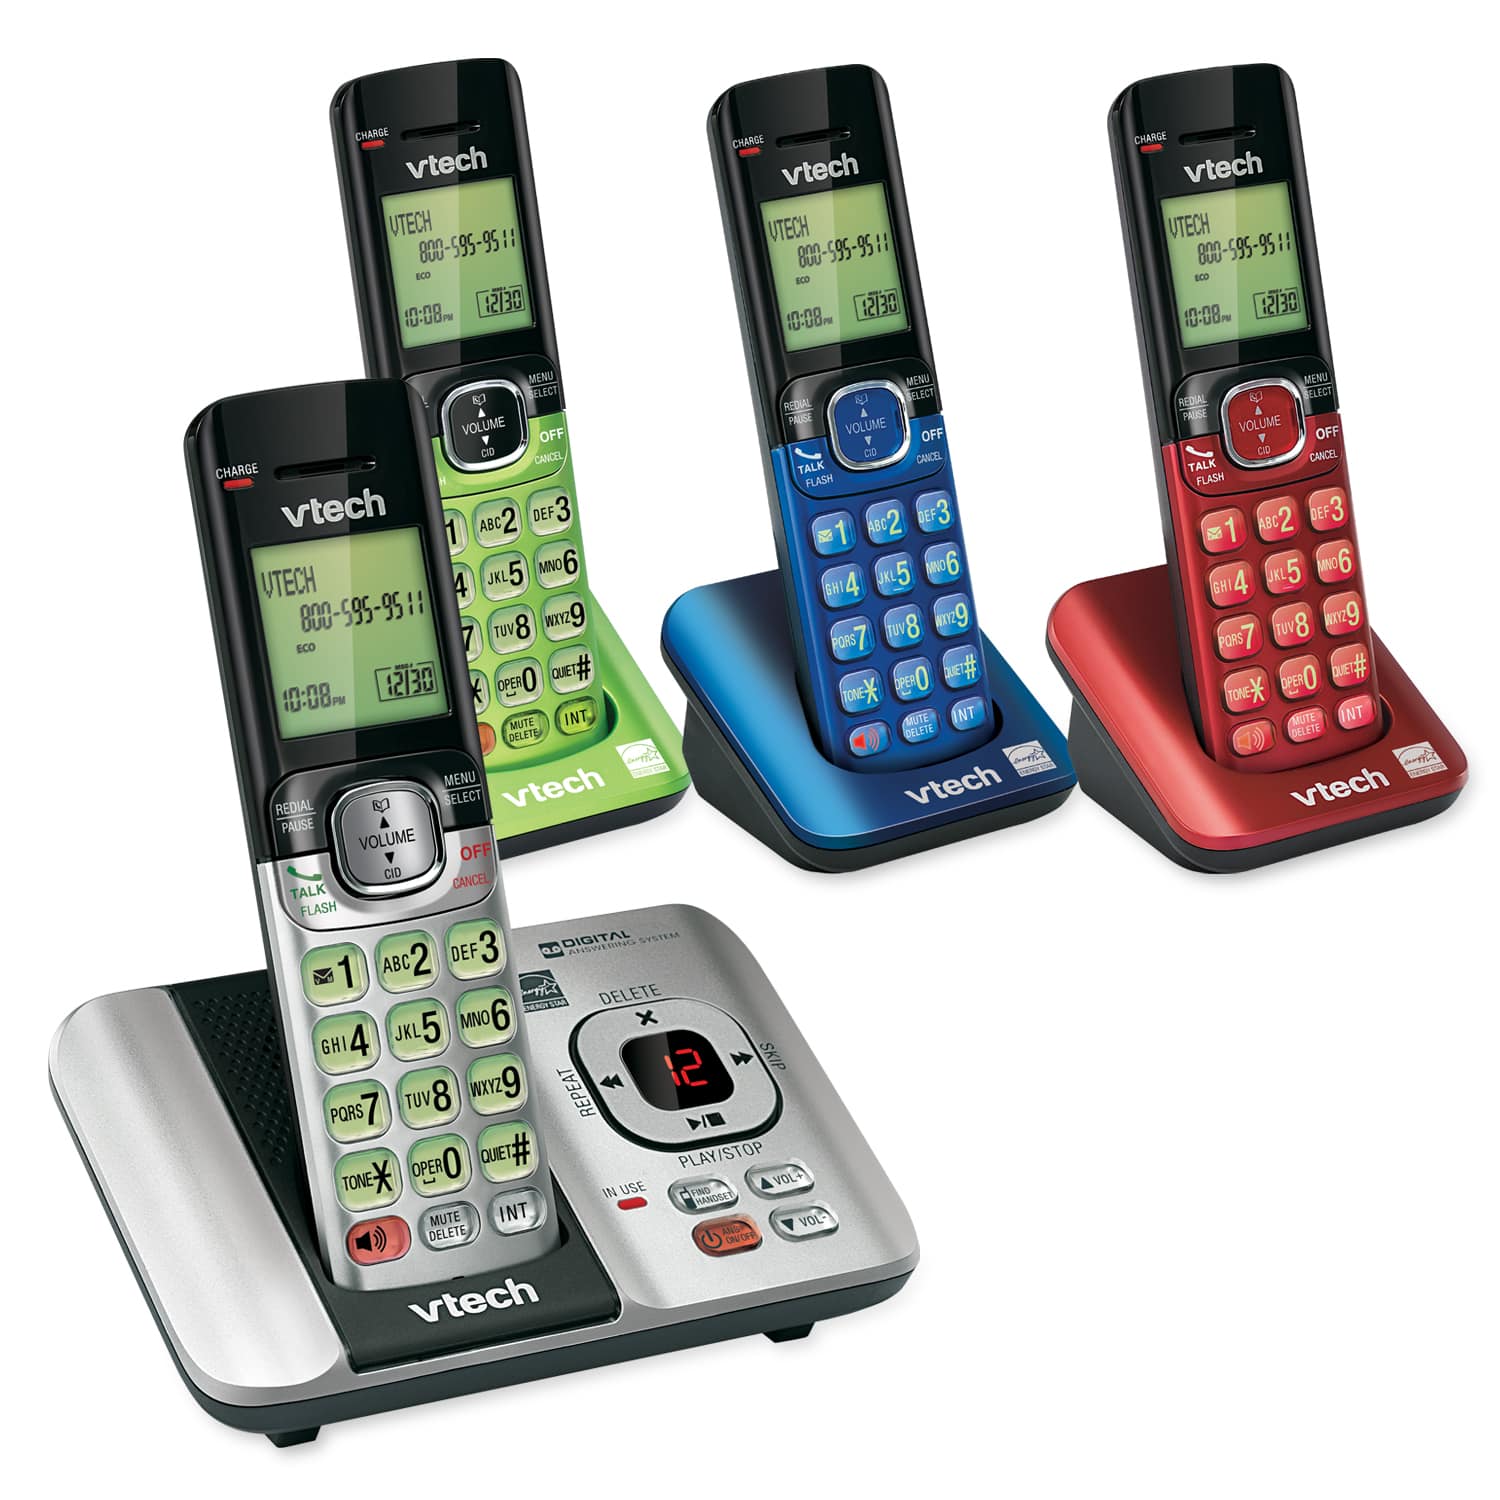 4 Handset Answering System with Caller ID/Call Waiting